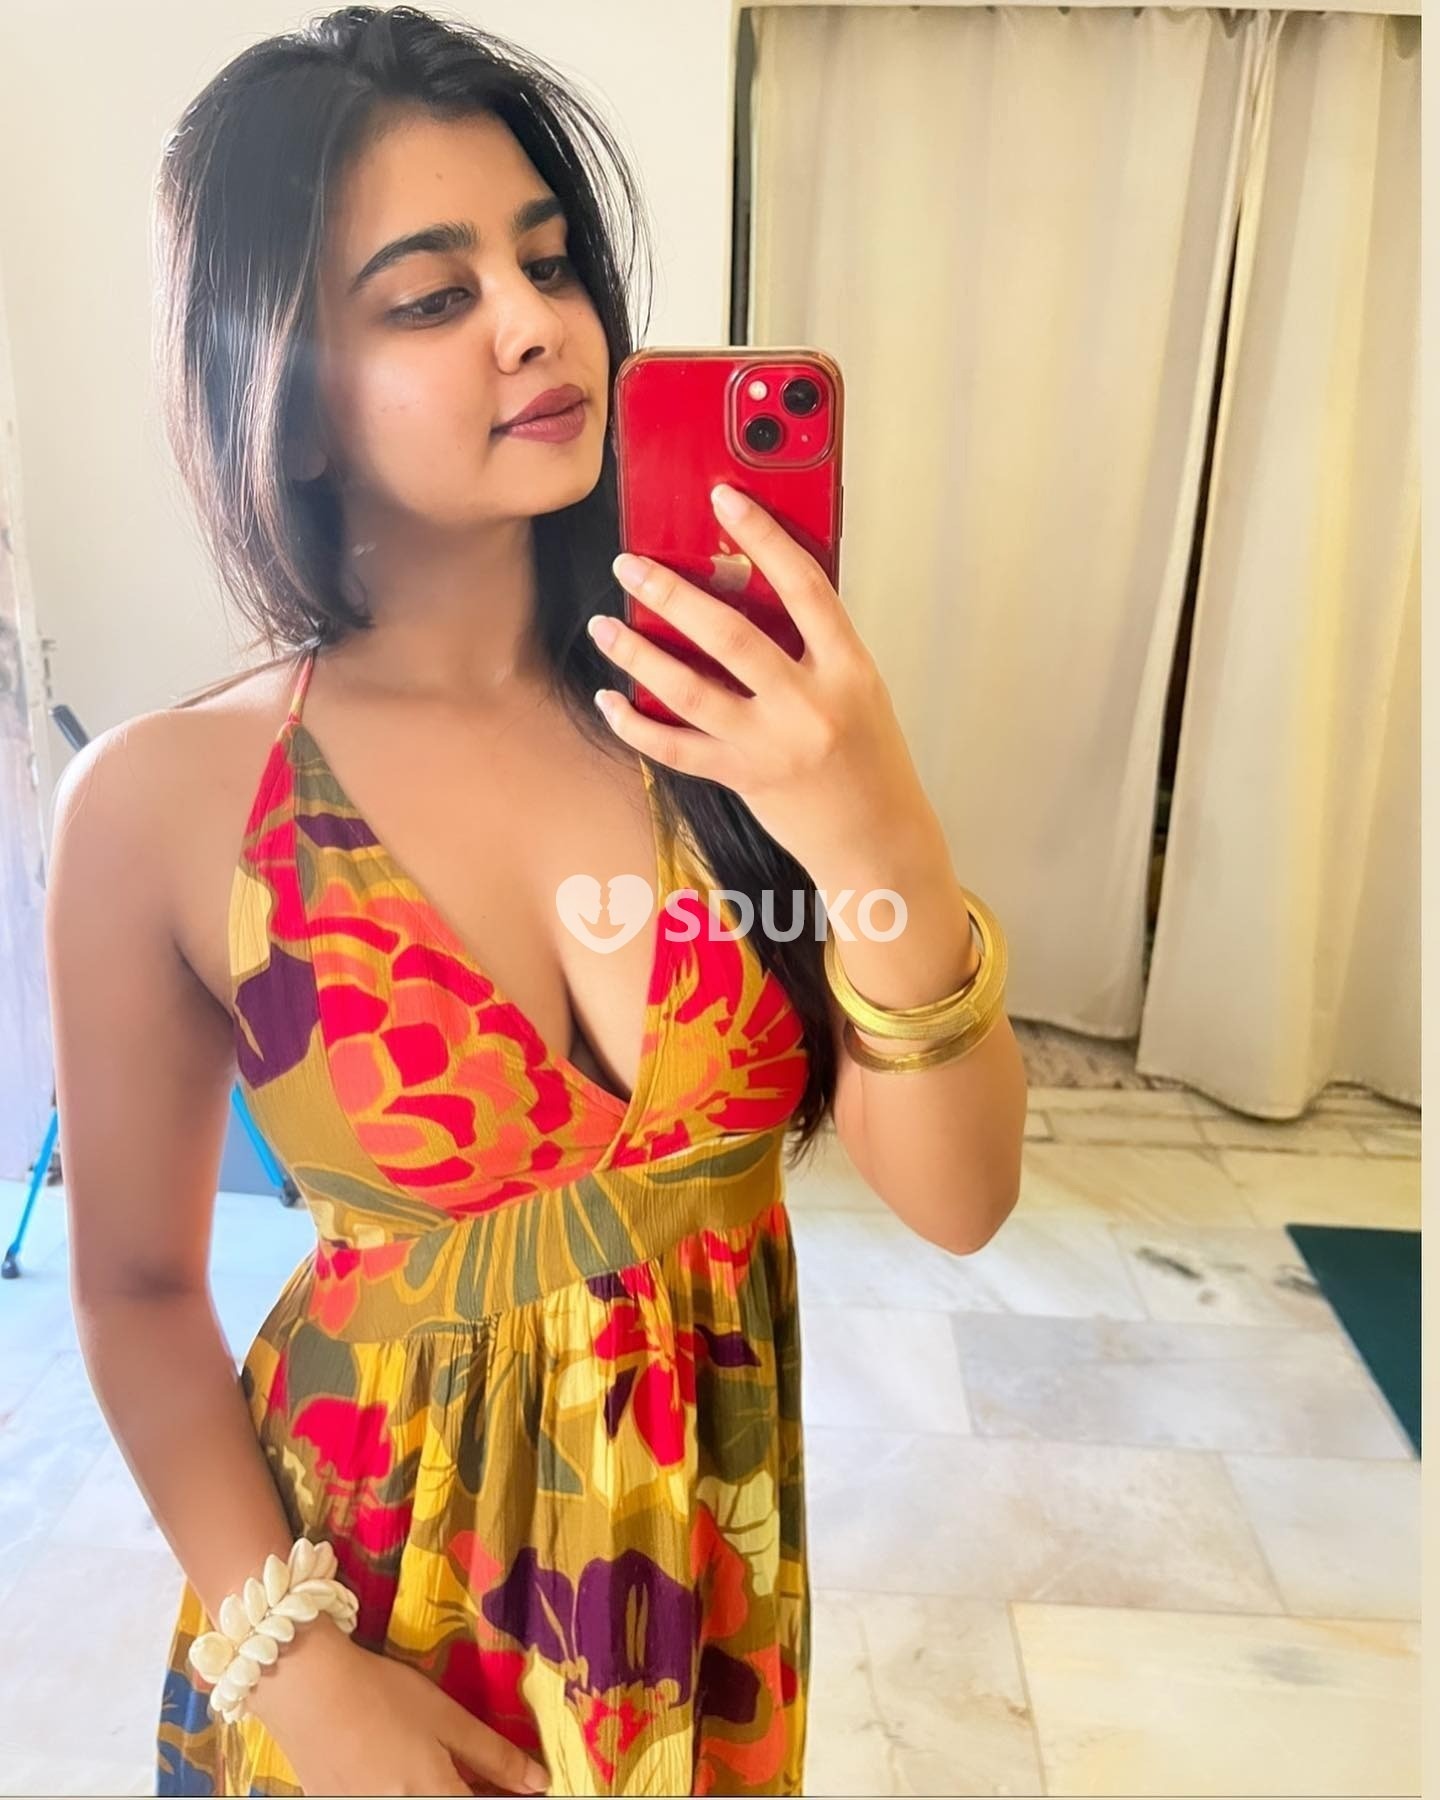 Ahmedabad 🔷 █▬█⓿▀█▀ 𝐆𝐈𝐑𝐋 𝐇𝐎𝐓 𝐀𝐍𝐃 𝐒𝐄XY GIRLS AND HOUSEWIFE AVAILABLE